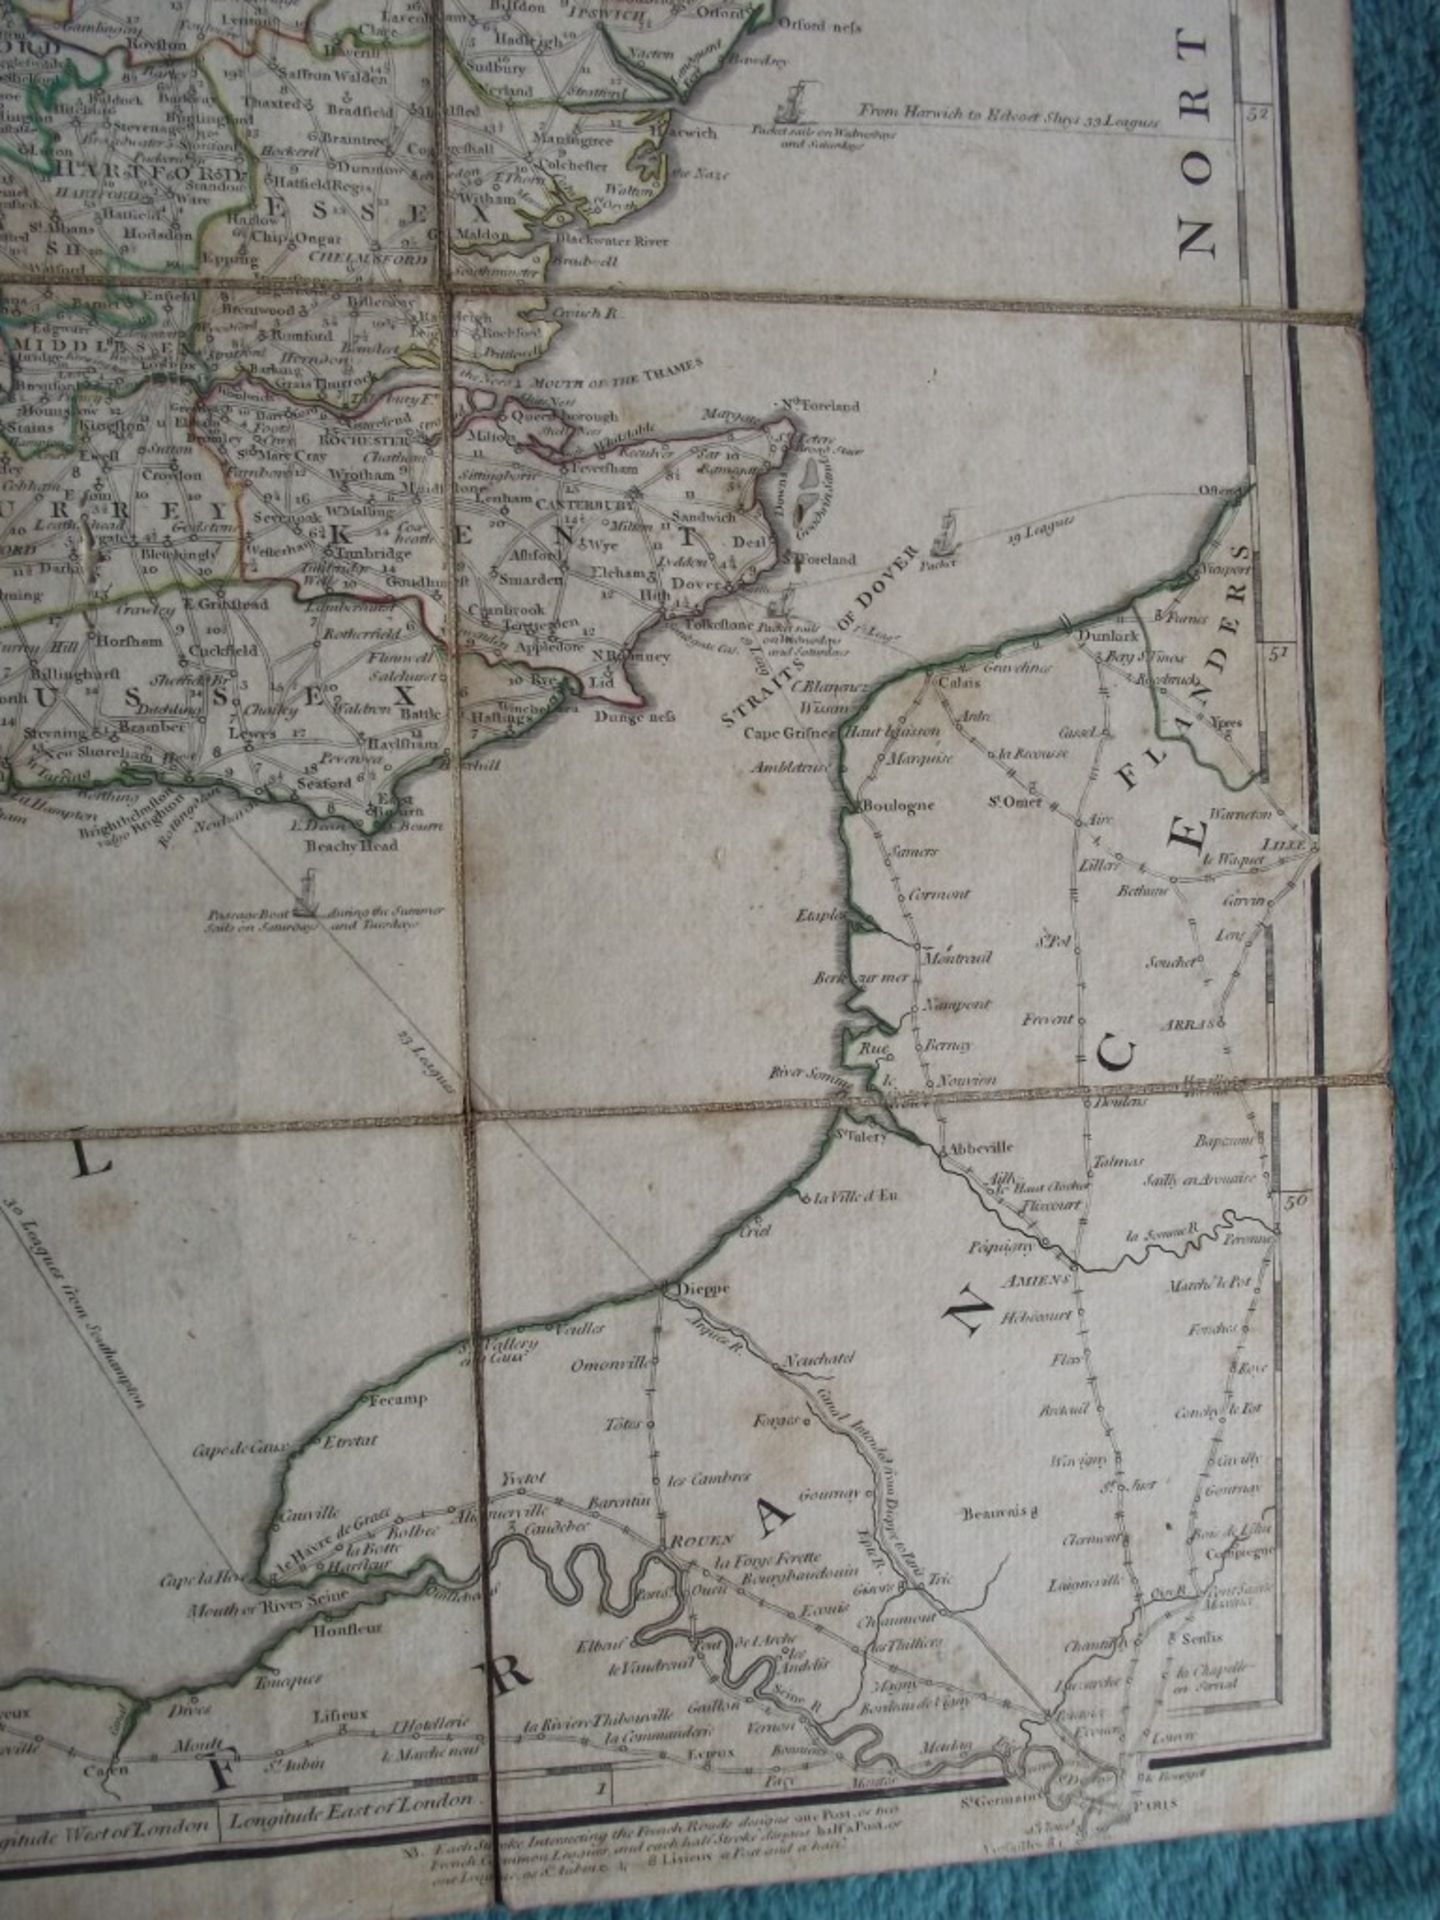 A New Map of The Roads of England and Scotland - Laurie & Whittle - 1794 - With Original Case - Image 12 of 32